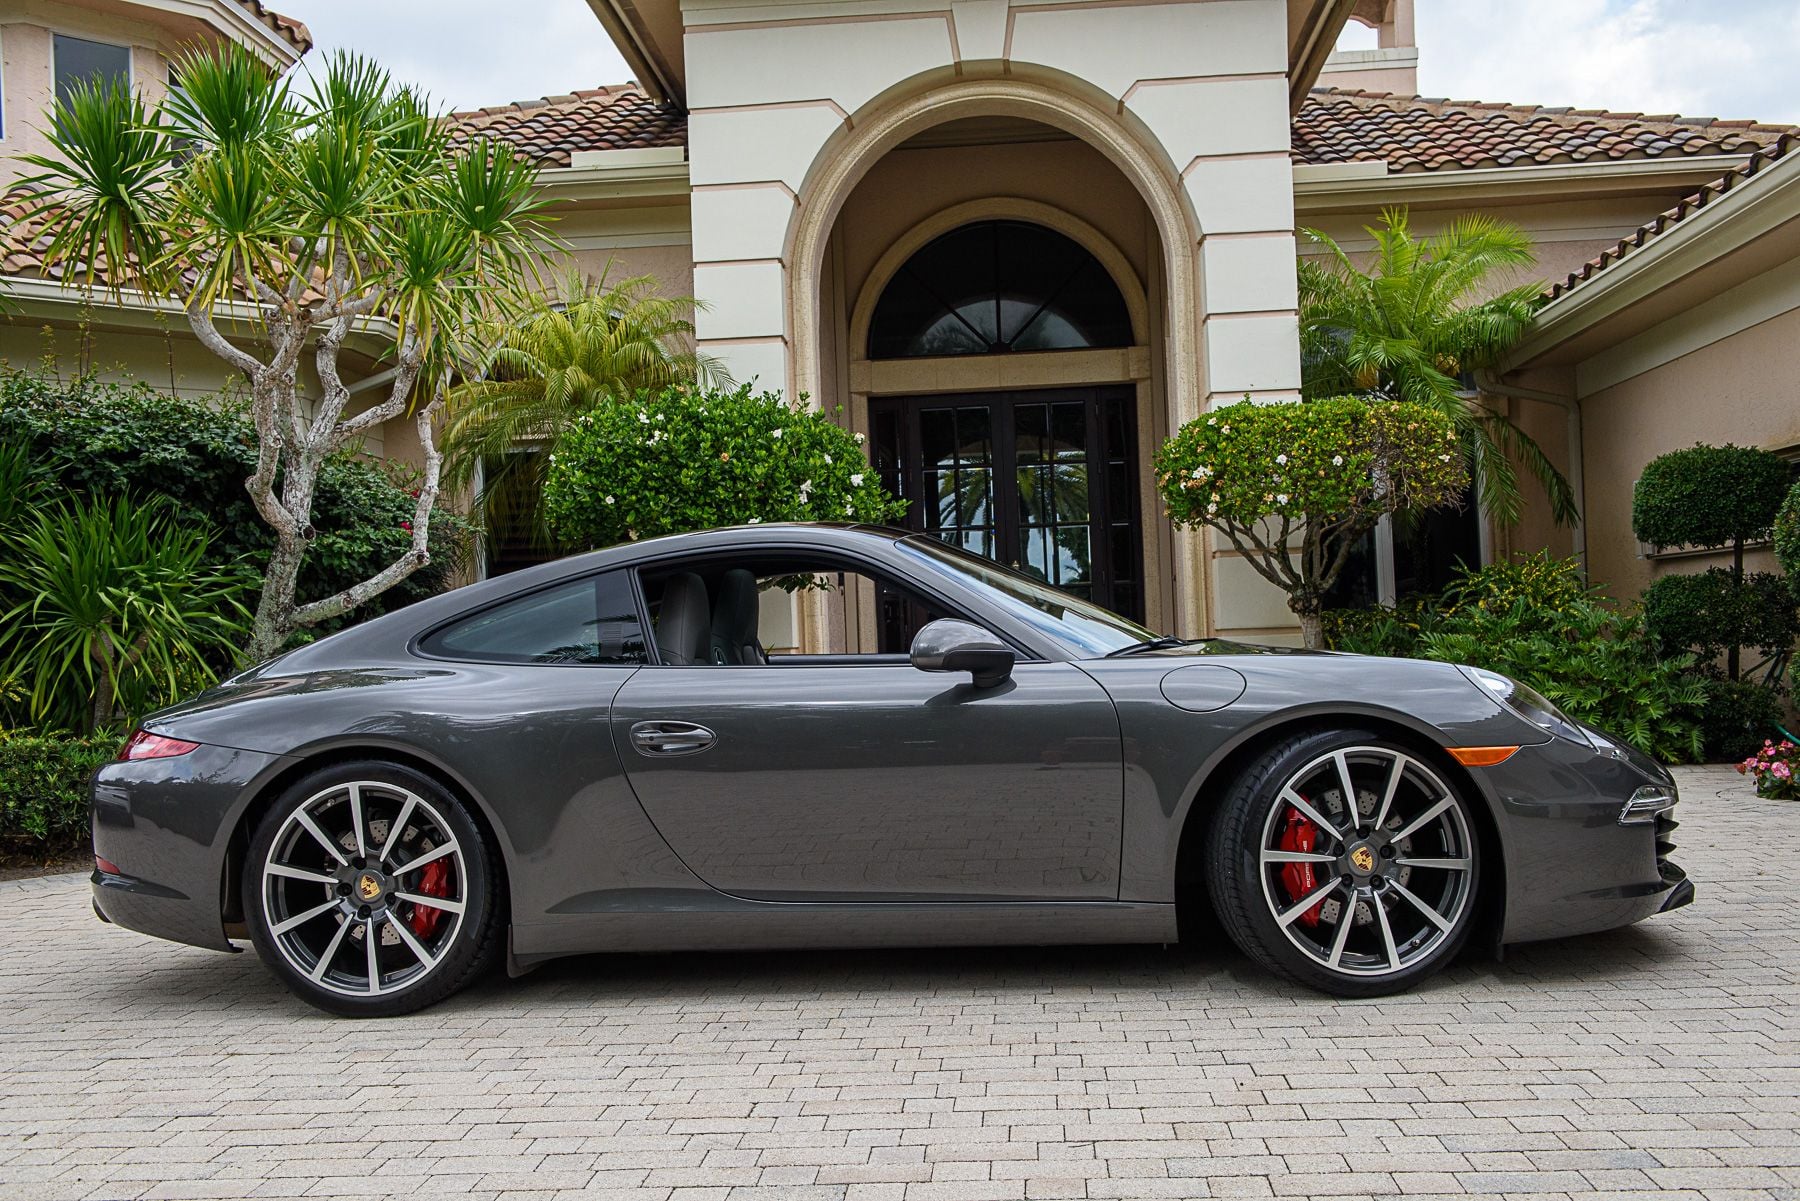 2014 Porsche 911 - 2014 911 Carrera S Coupe 5126 miles Original Owner PDK - Used - VIN WP0AB2A92ES120689 - 5,126 Miles - 6 cyl - 2WD - Automatic - Coupe - Gray - Palm Beach Gardens, FL 33418, United States